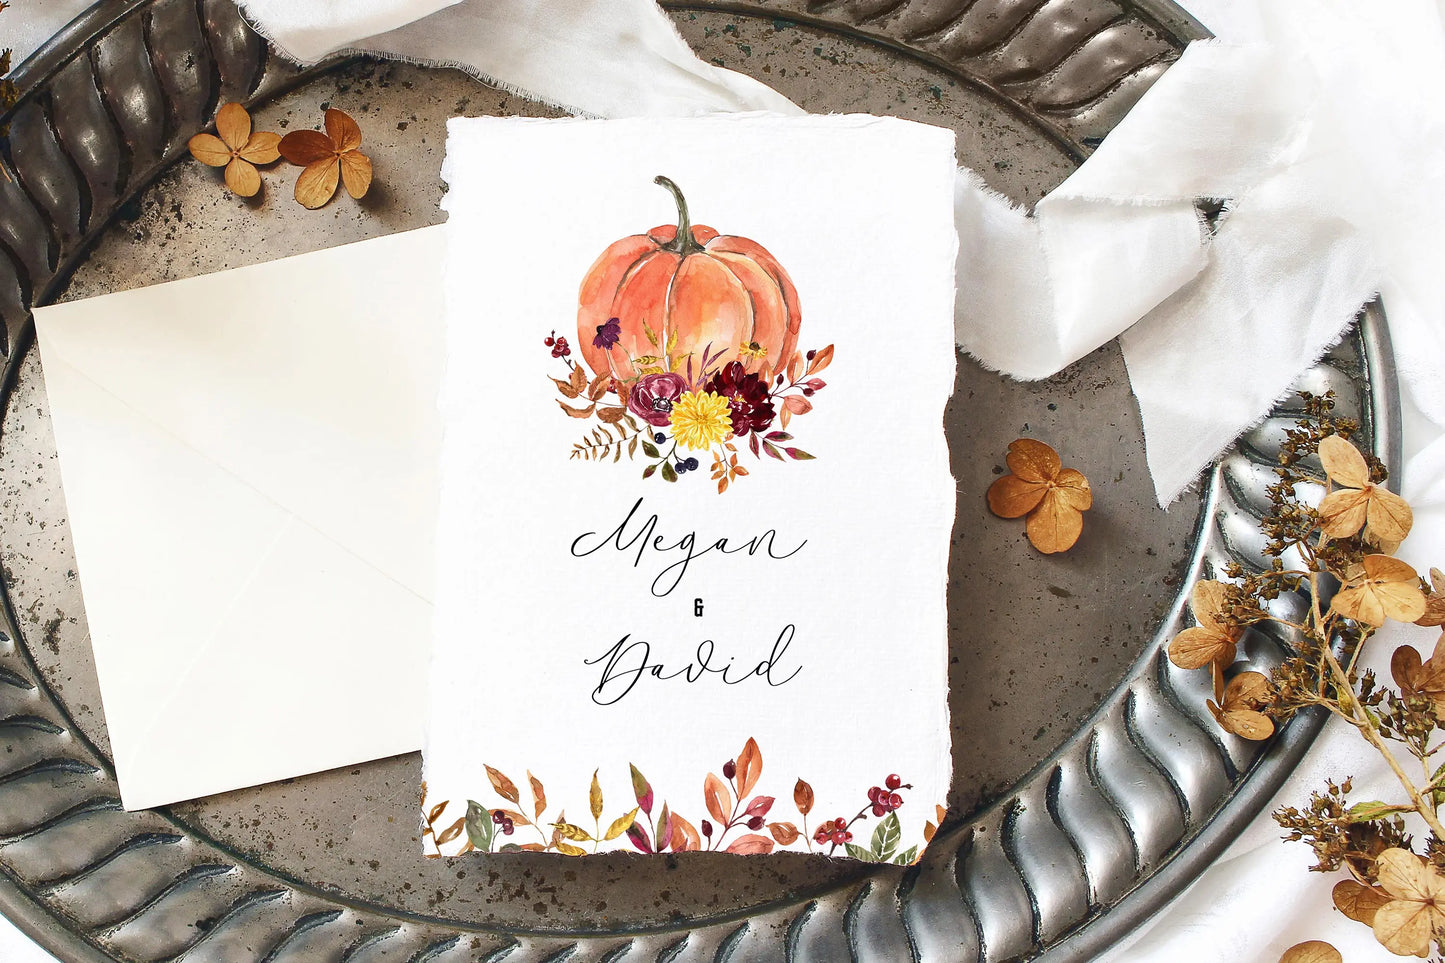 Watercolor white pumpkin clipart, fall floral clipart, fall wreath, watercolor pumpkin clip art, autumn flowers png, fall border clipart, fall foliage, fall leaves frame, autumn wreath, frame, autumn wedding invitation.